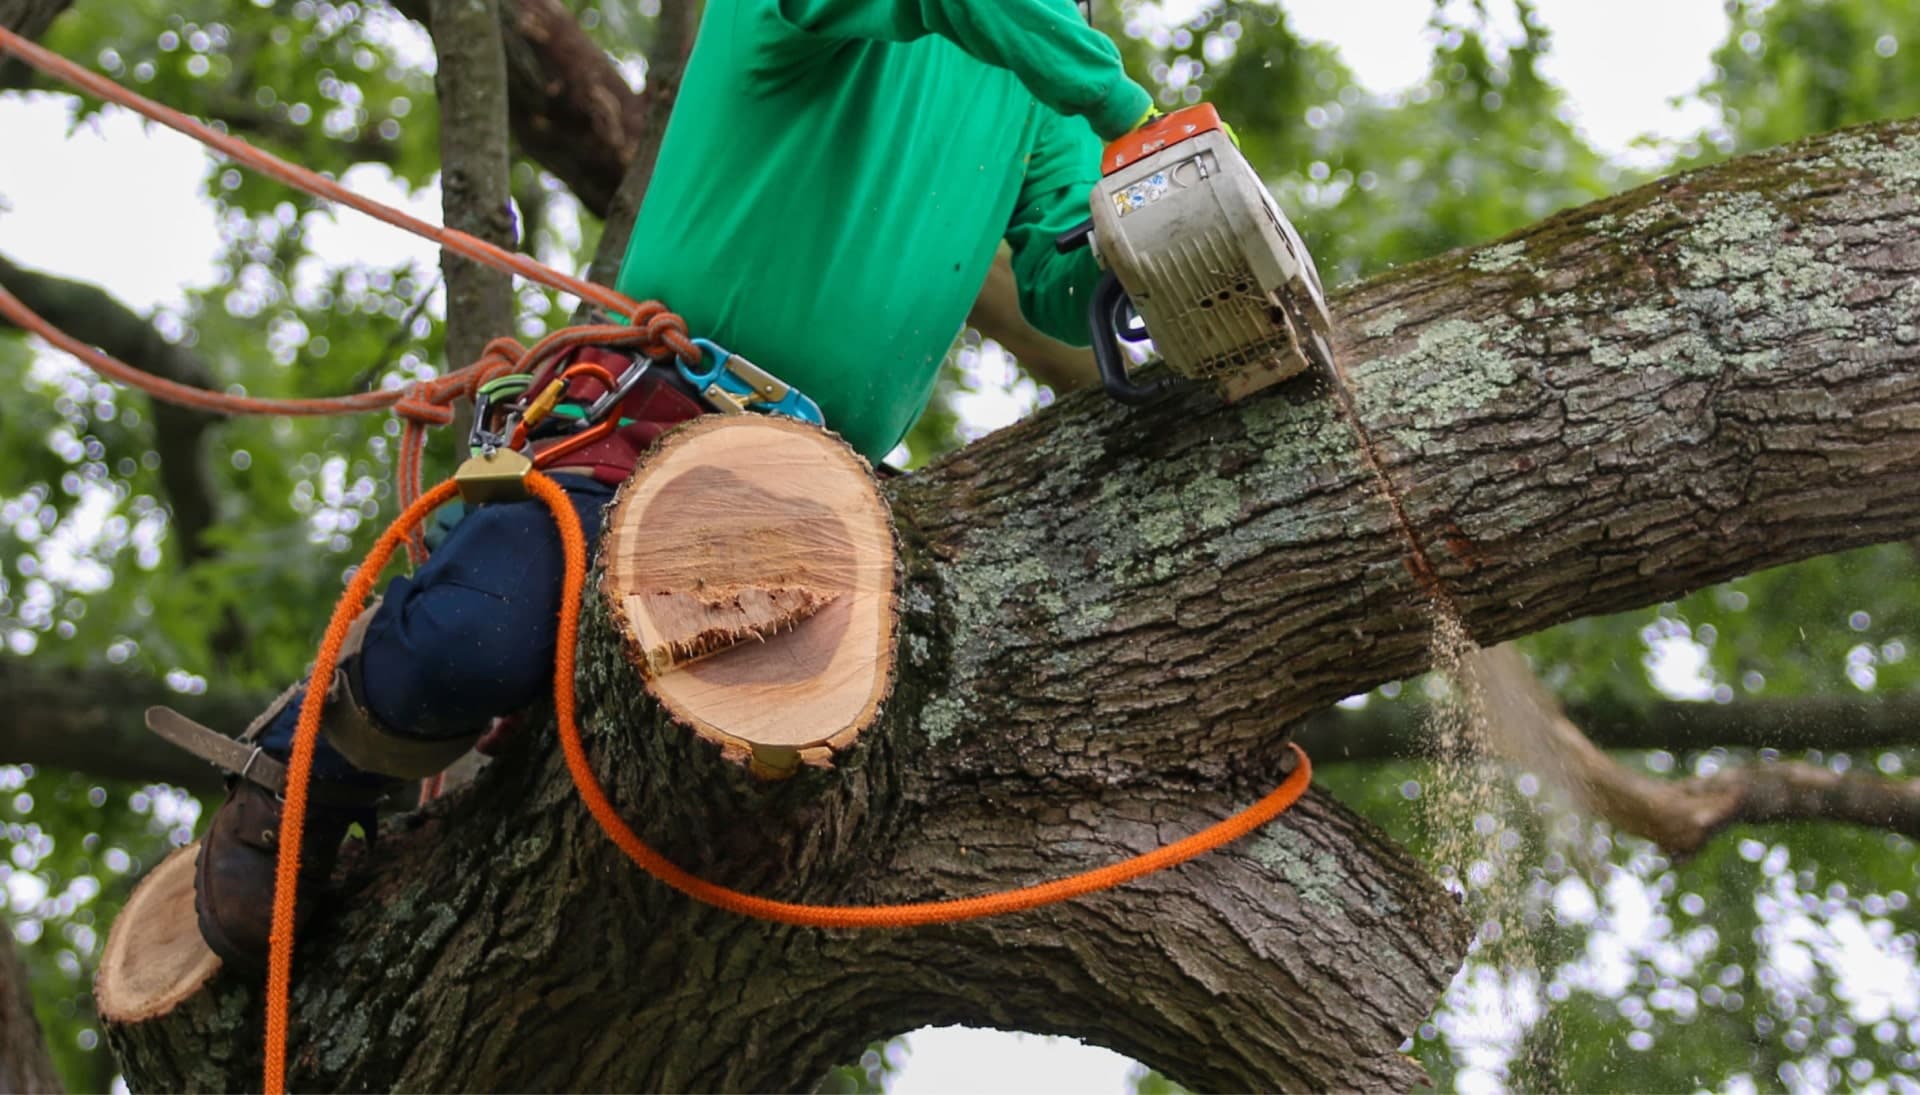 Shed your worries away with best tree removal in Lansing